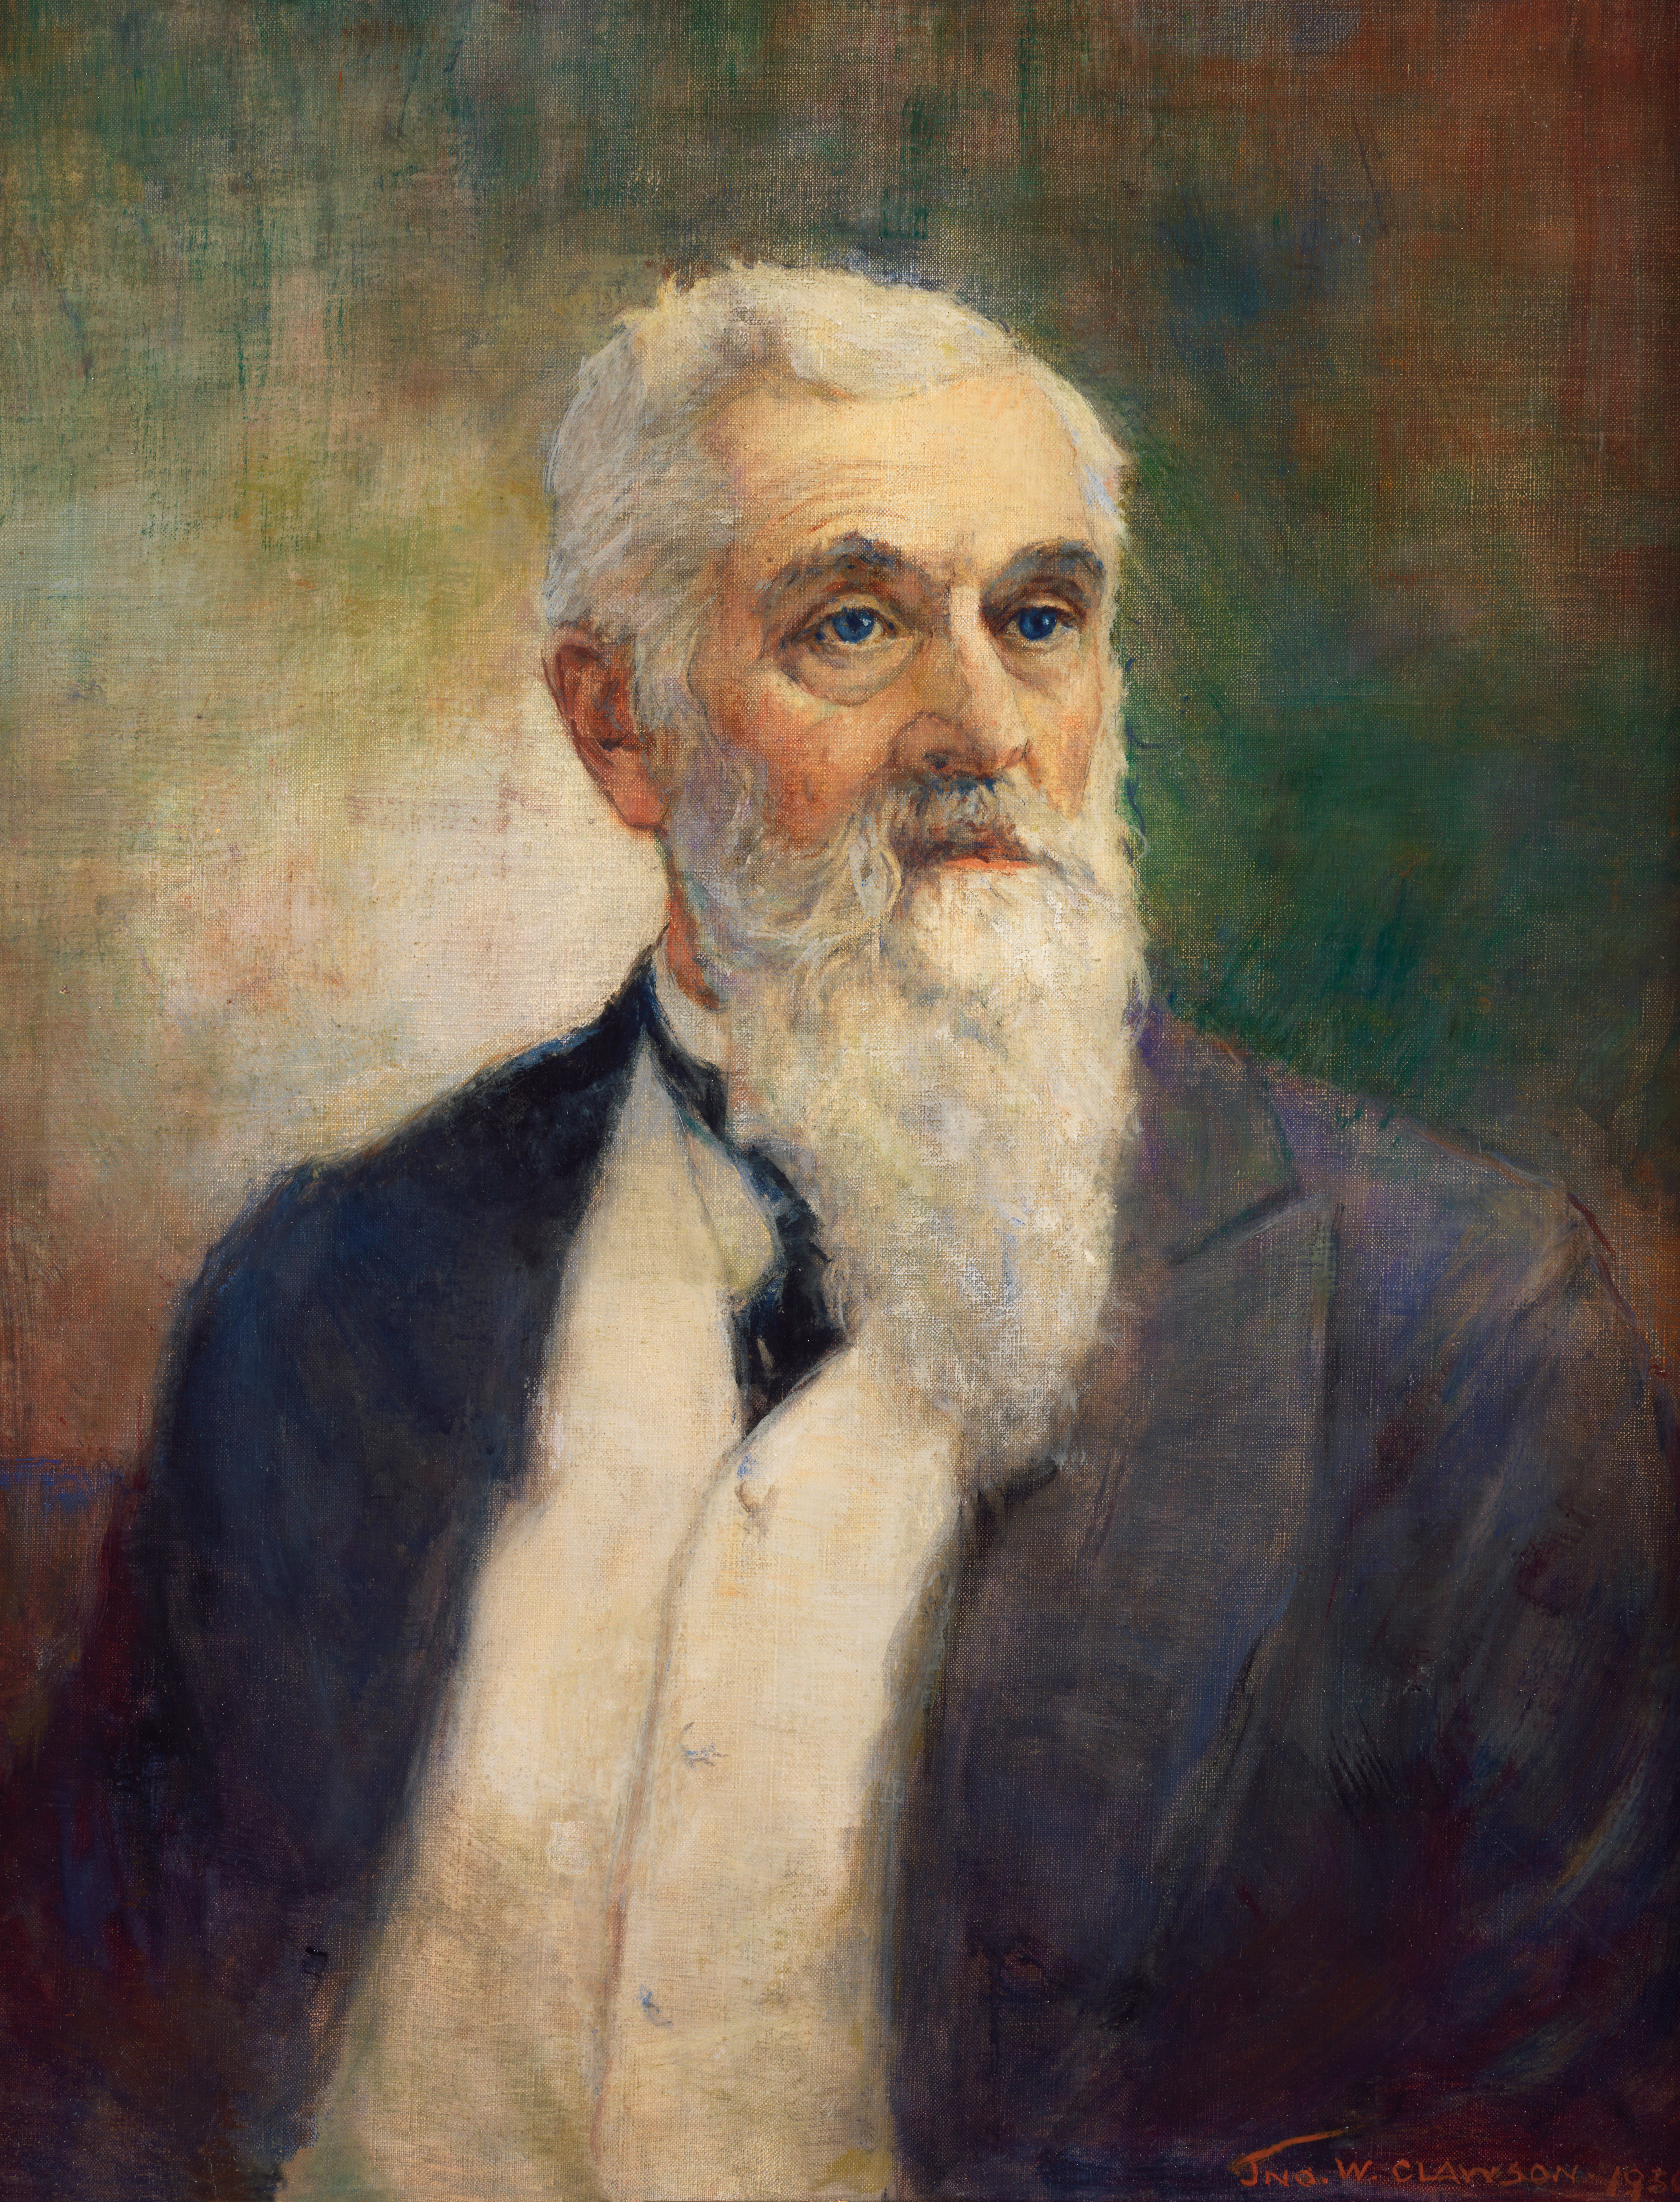 A painting of the prophet Lorenzo Snow in a white vest, dark suit, and long beard, by John Willard Clawson, dated 1936.